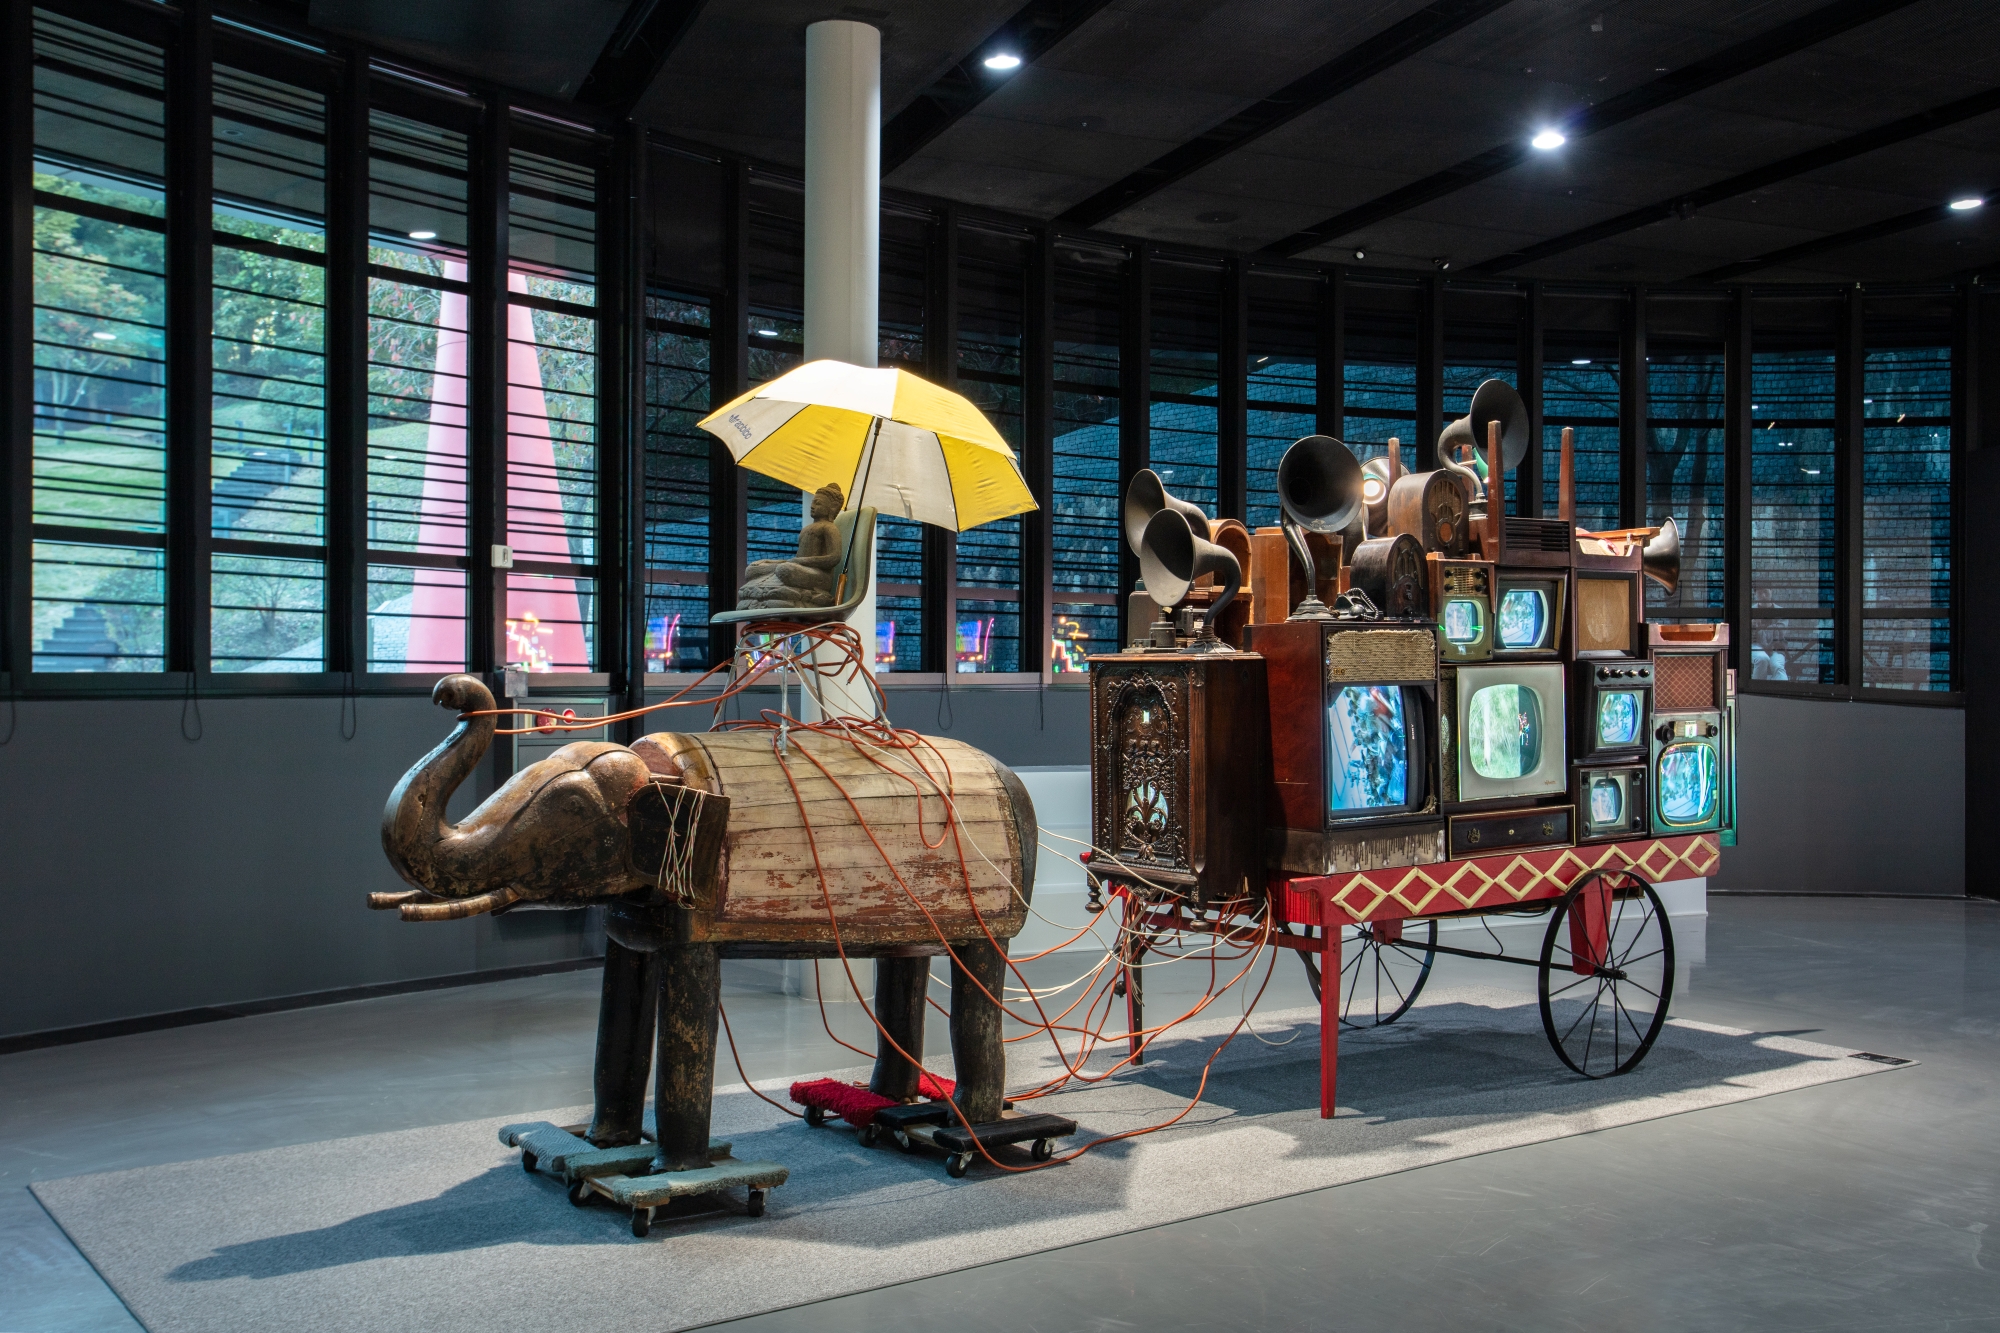 Installation artwork in the form of a cart drawn by an elephant, whose four legs rest on dollies with casters. A human figure seated in a chair and protected by an umbrella is on top of the elephant. The car the elephant draws carries multiple television monitors and old-fashioned gramophones. 